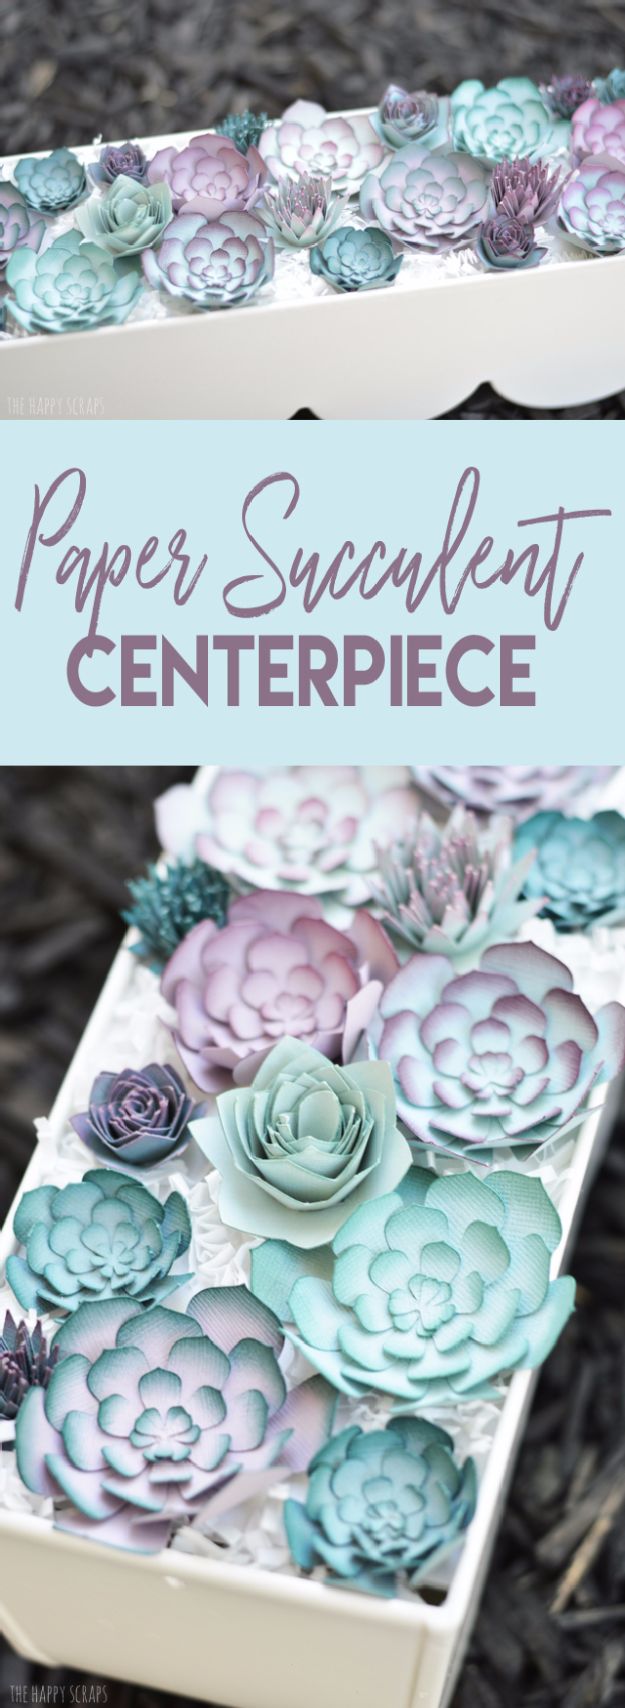 DIY Paper Flowers For Your Room - Paper Succulent Centerpiece - How To Make A Paper Flower - Large Wedding Backdrop for Wall Decor - Easy Tissue Paper Flower Tutorial for Kids - Giant Projects for Photo Backdrops - Daisy, Roses, Bouquets, Centerpieces - Cricut Template and Step by Step Tutorial #papercrafts #paperflowers #teencrafts